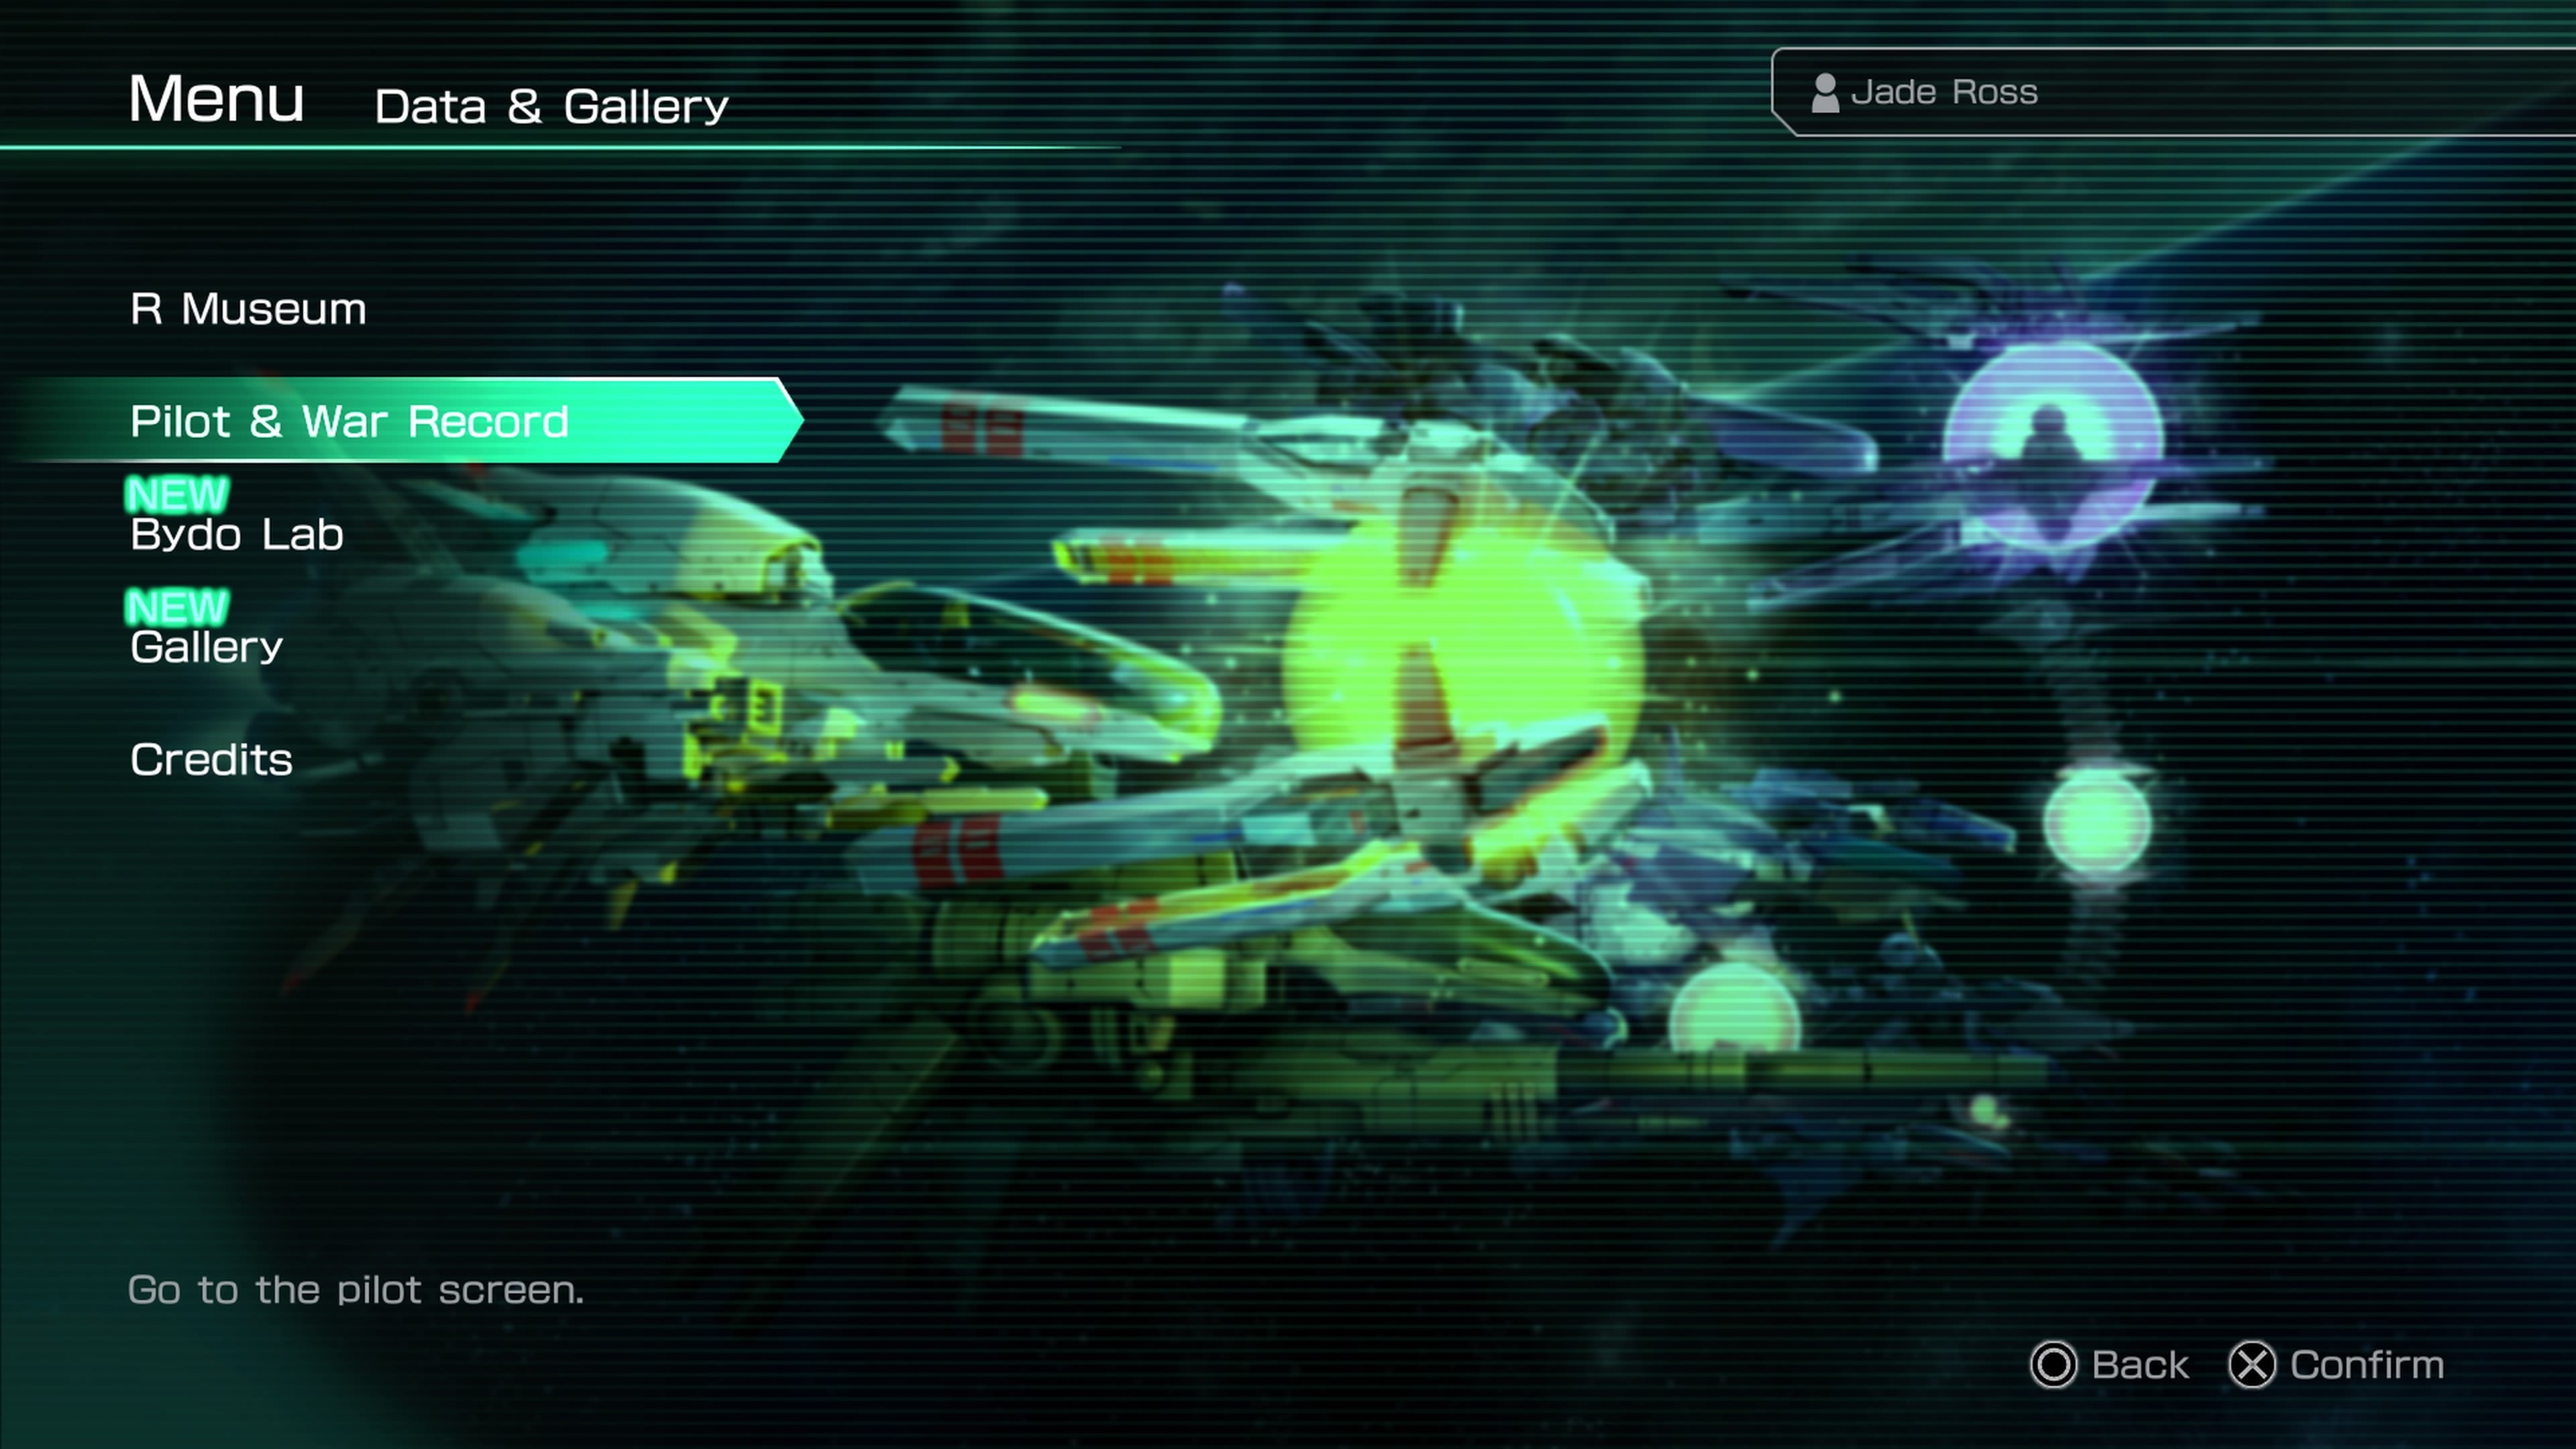 Select ”Data & Gallery” from the Menu screen 